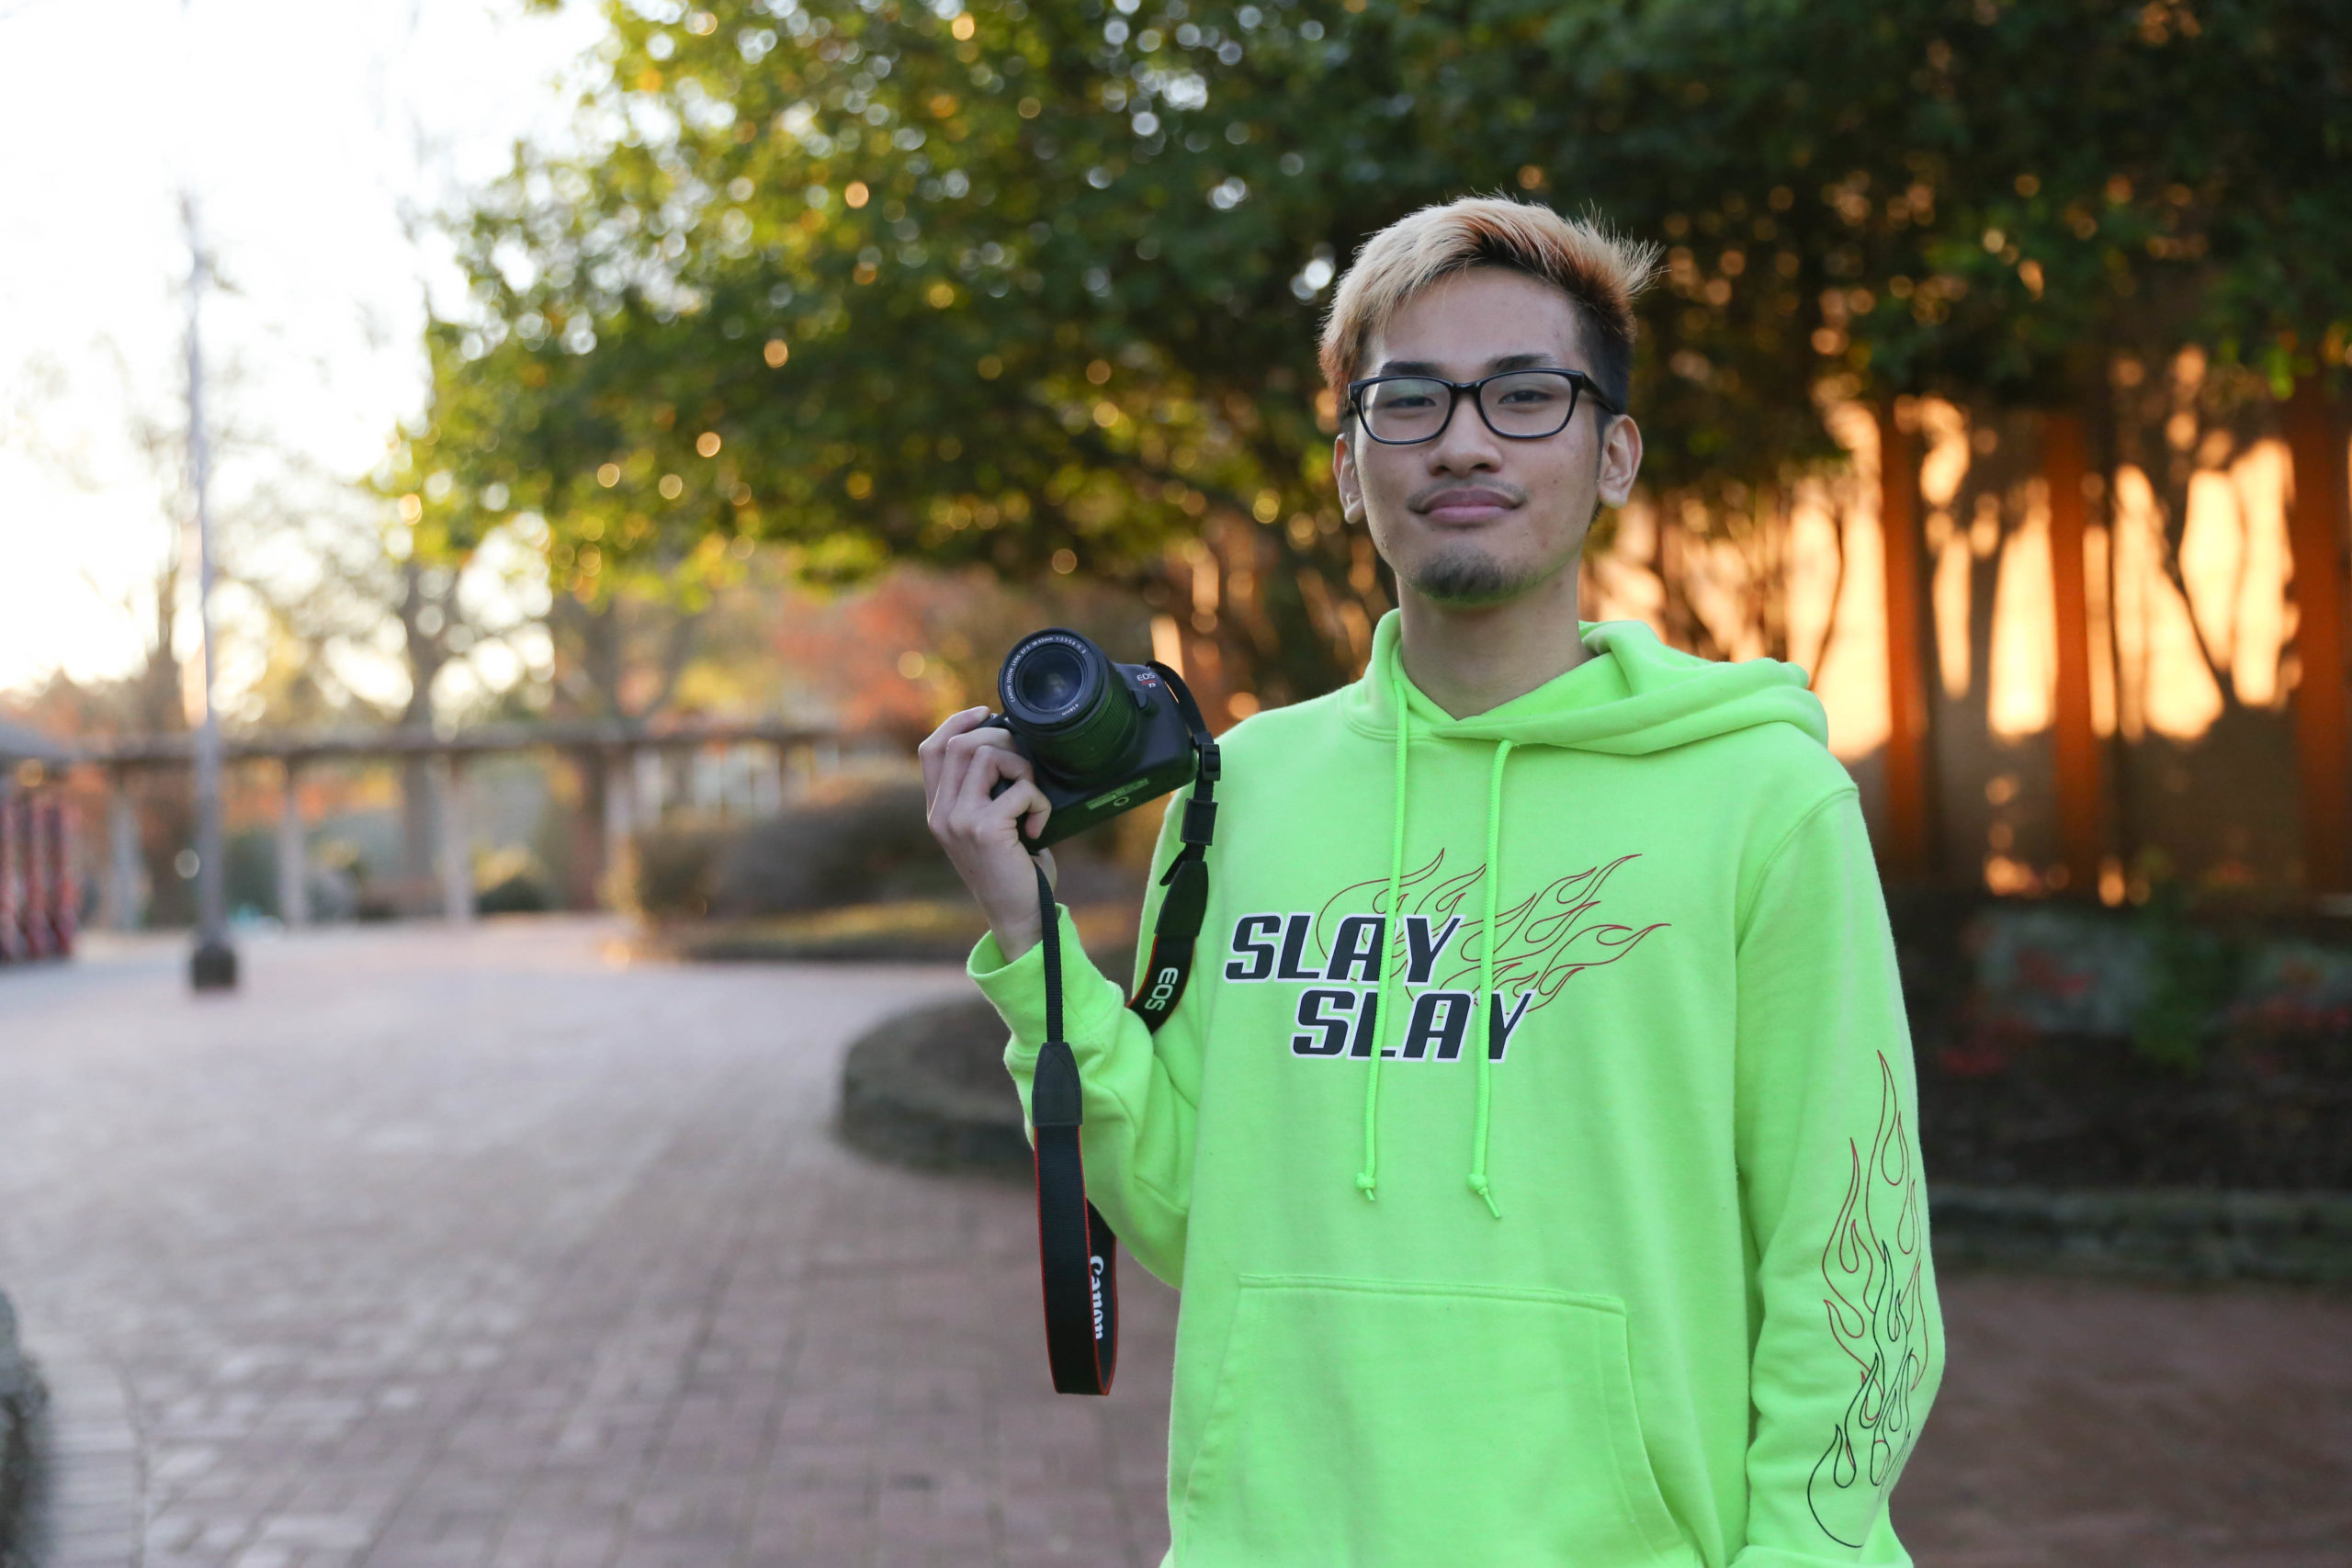 KSU student knows both sides of the camera for K-pop dance club